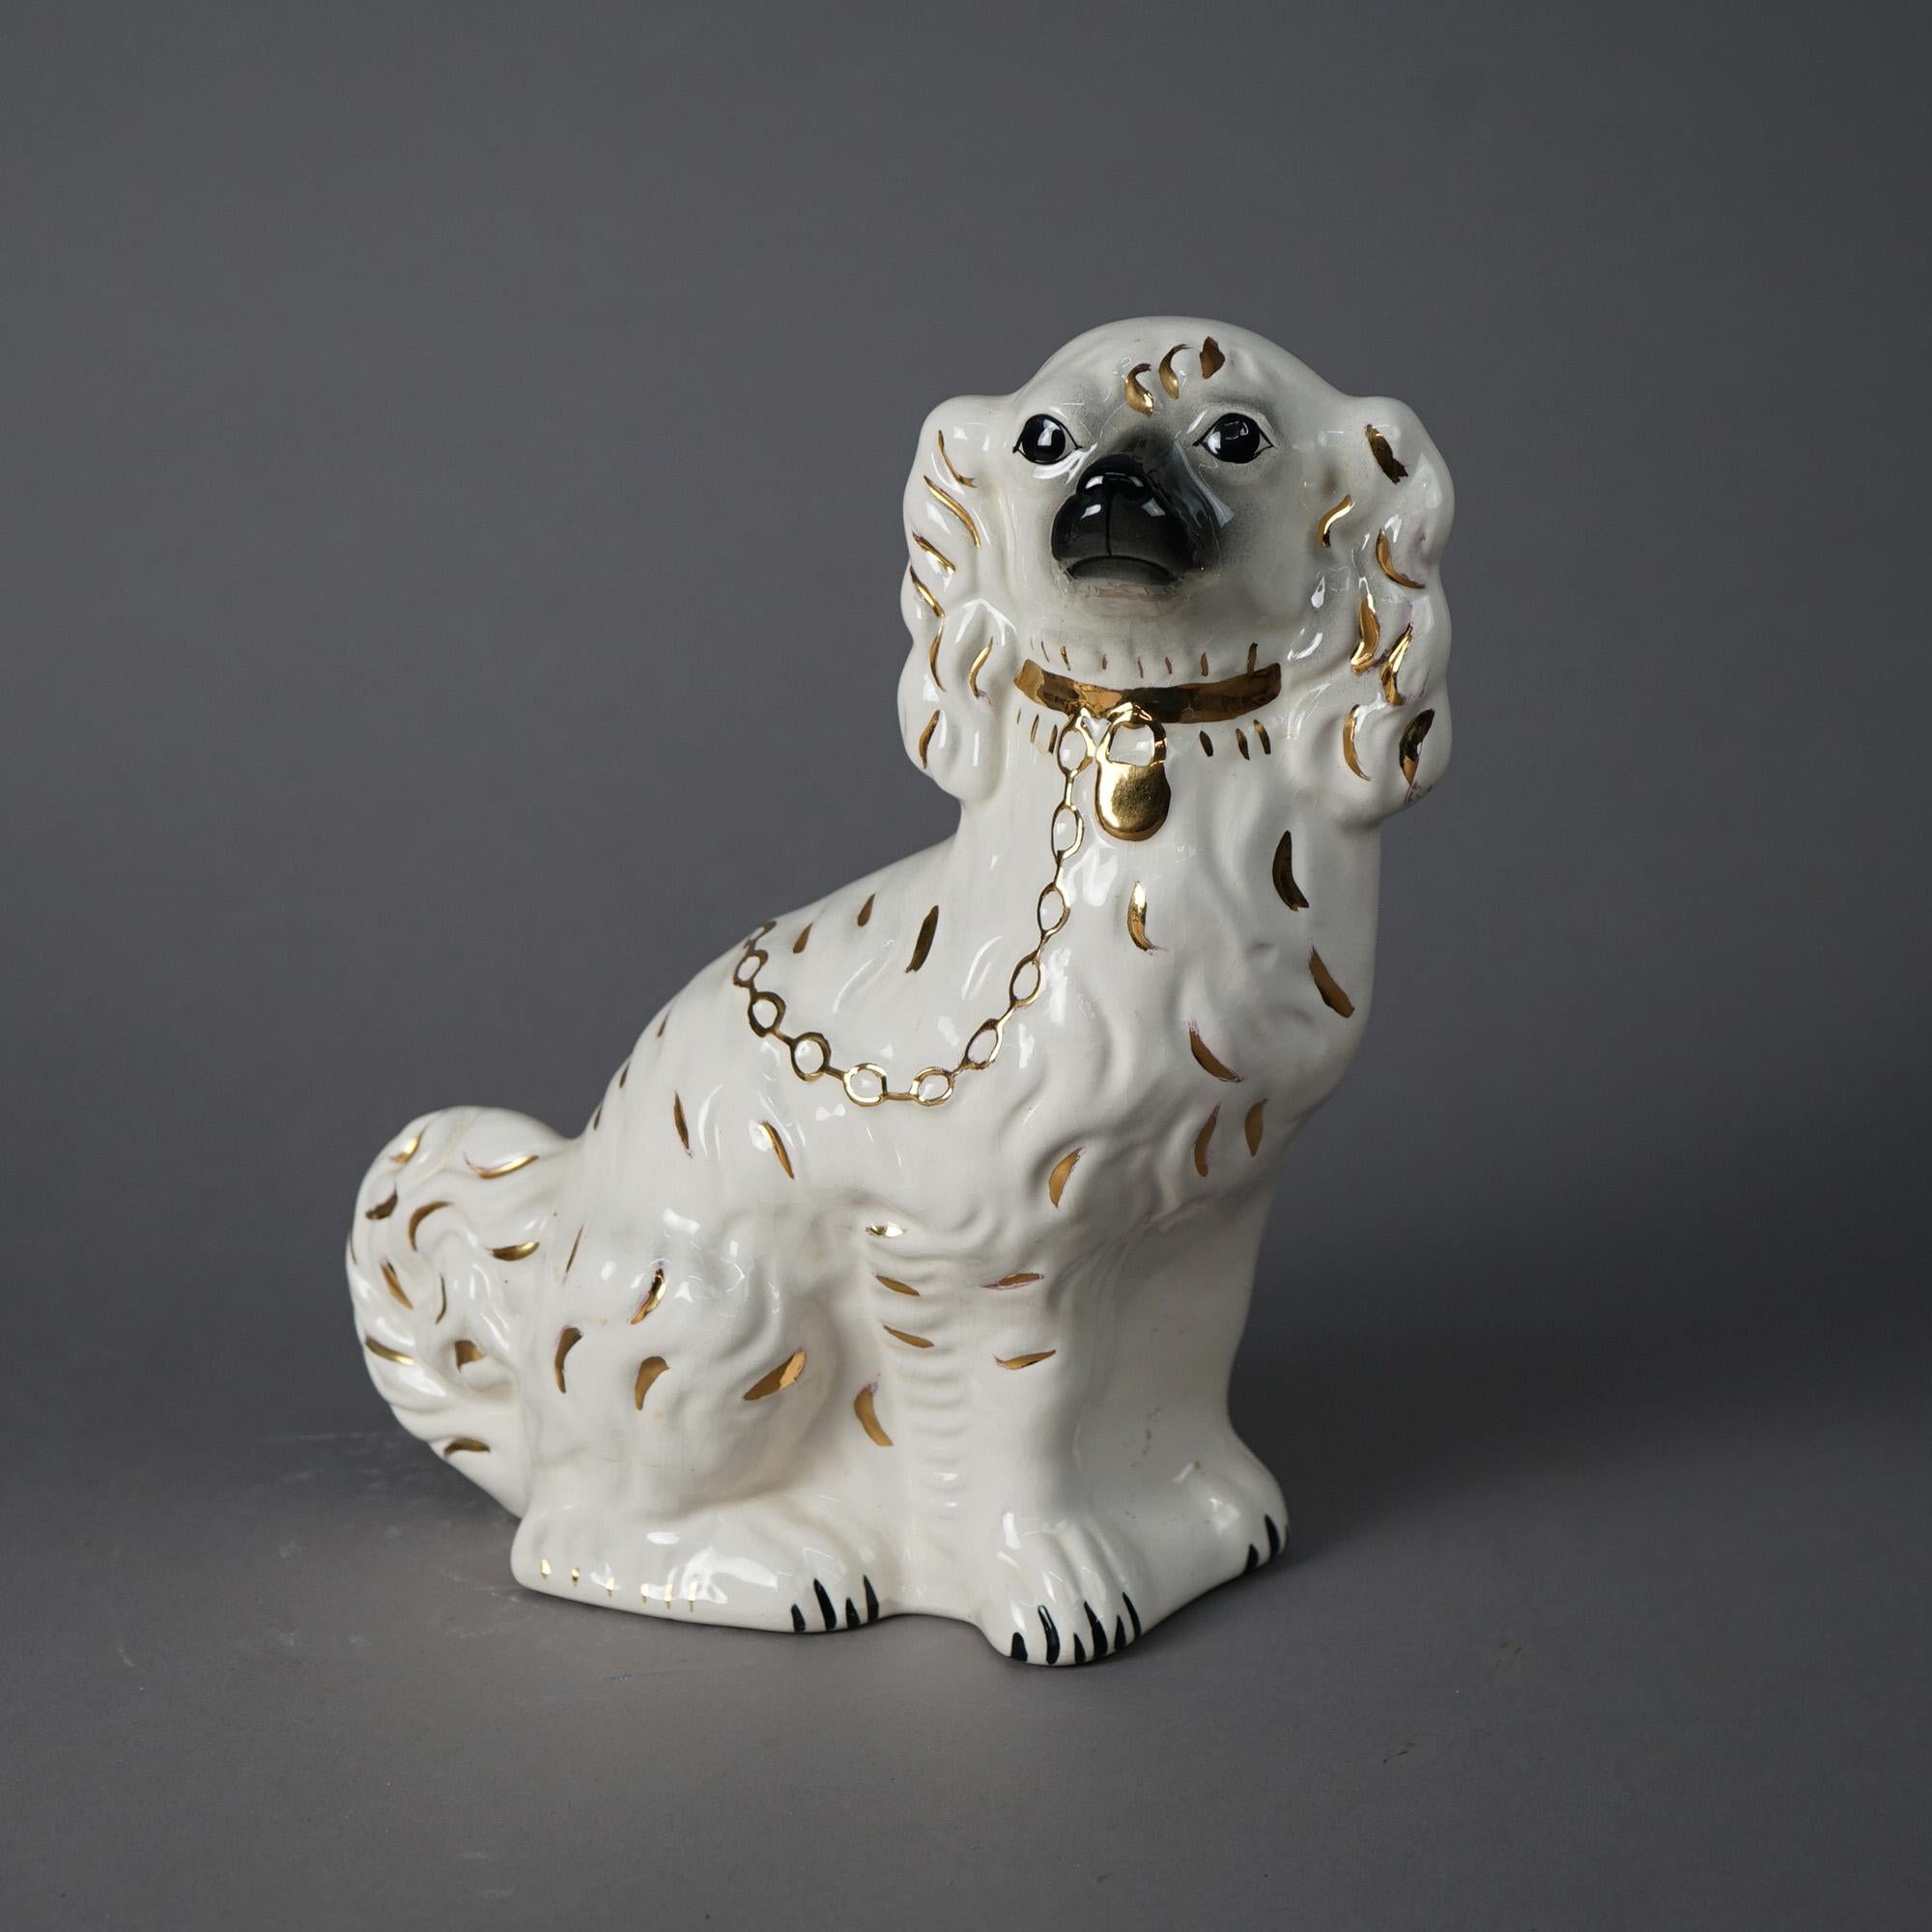 A pair of English Staffordshire dogs offer porcelain construction in Spaniel form, hand painted with gilt highlights, 20th century.

Measures - 11.25